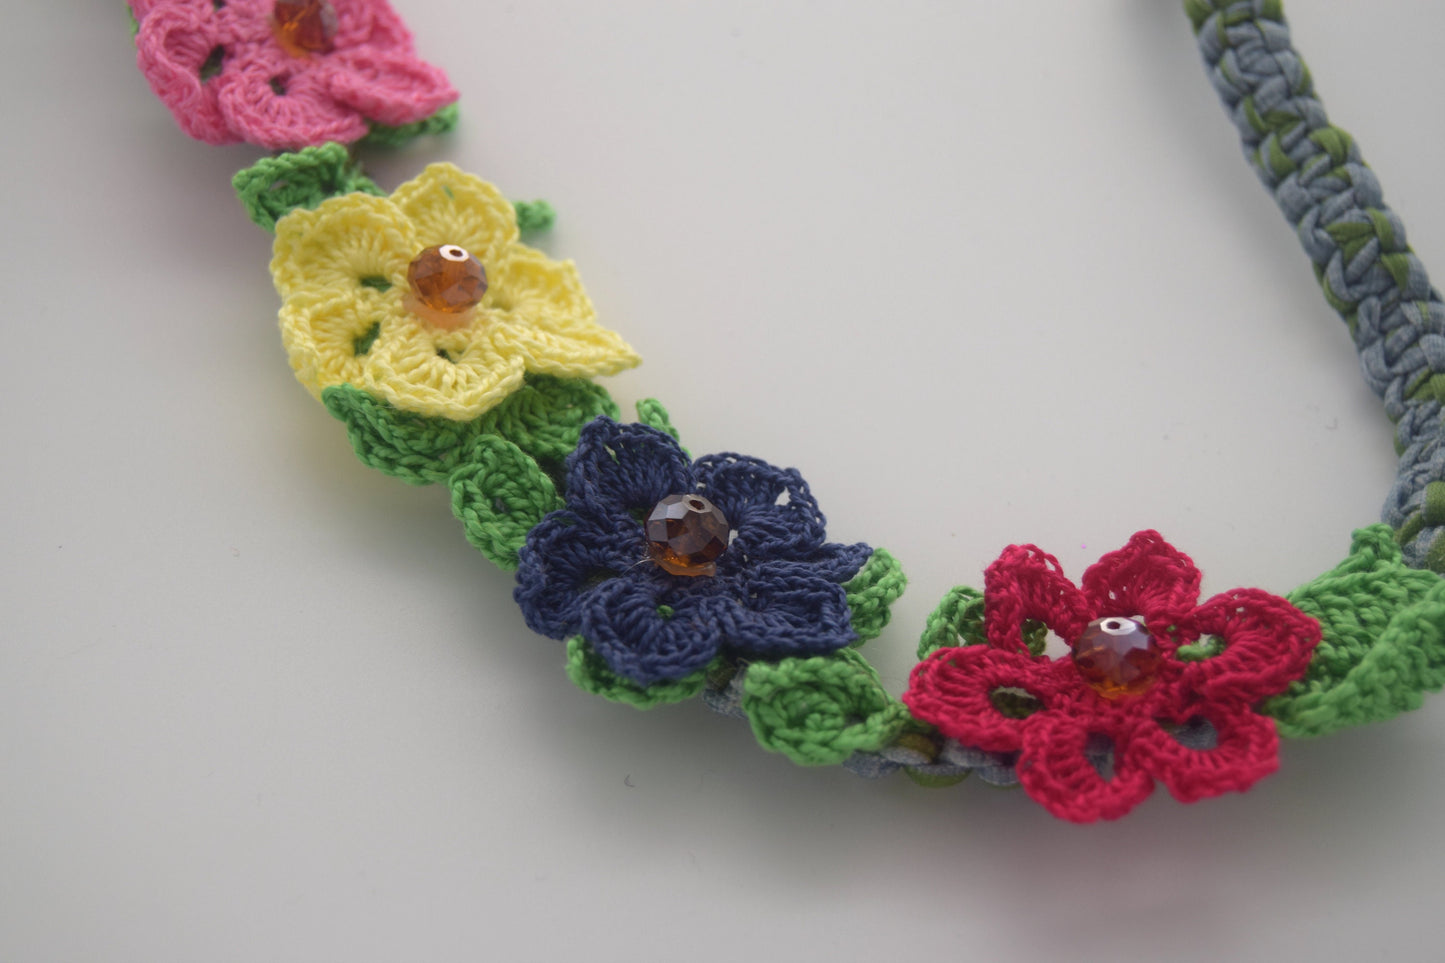 Crochet Necklace - Floral, Colorful Flowers, Handmade, T-Shirt Yarn